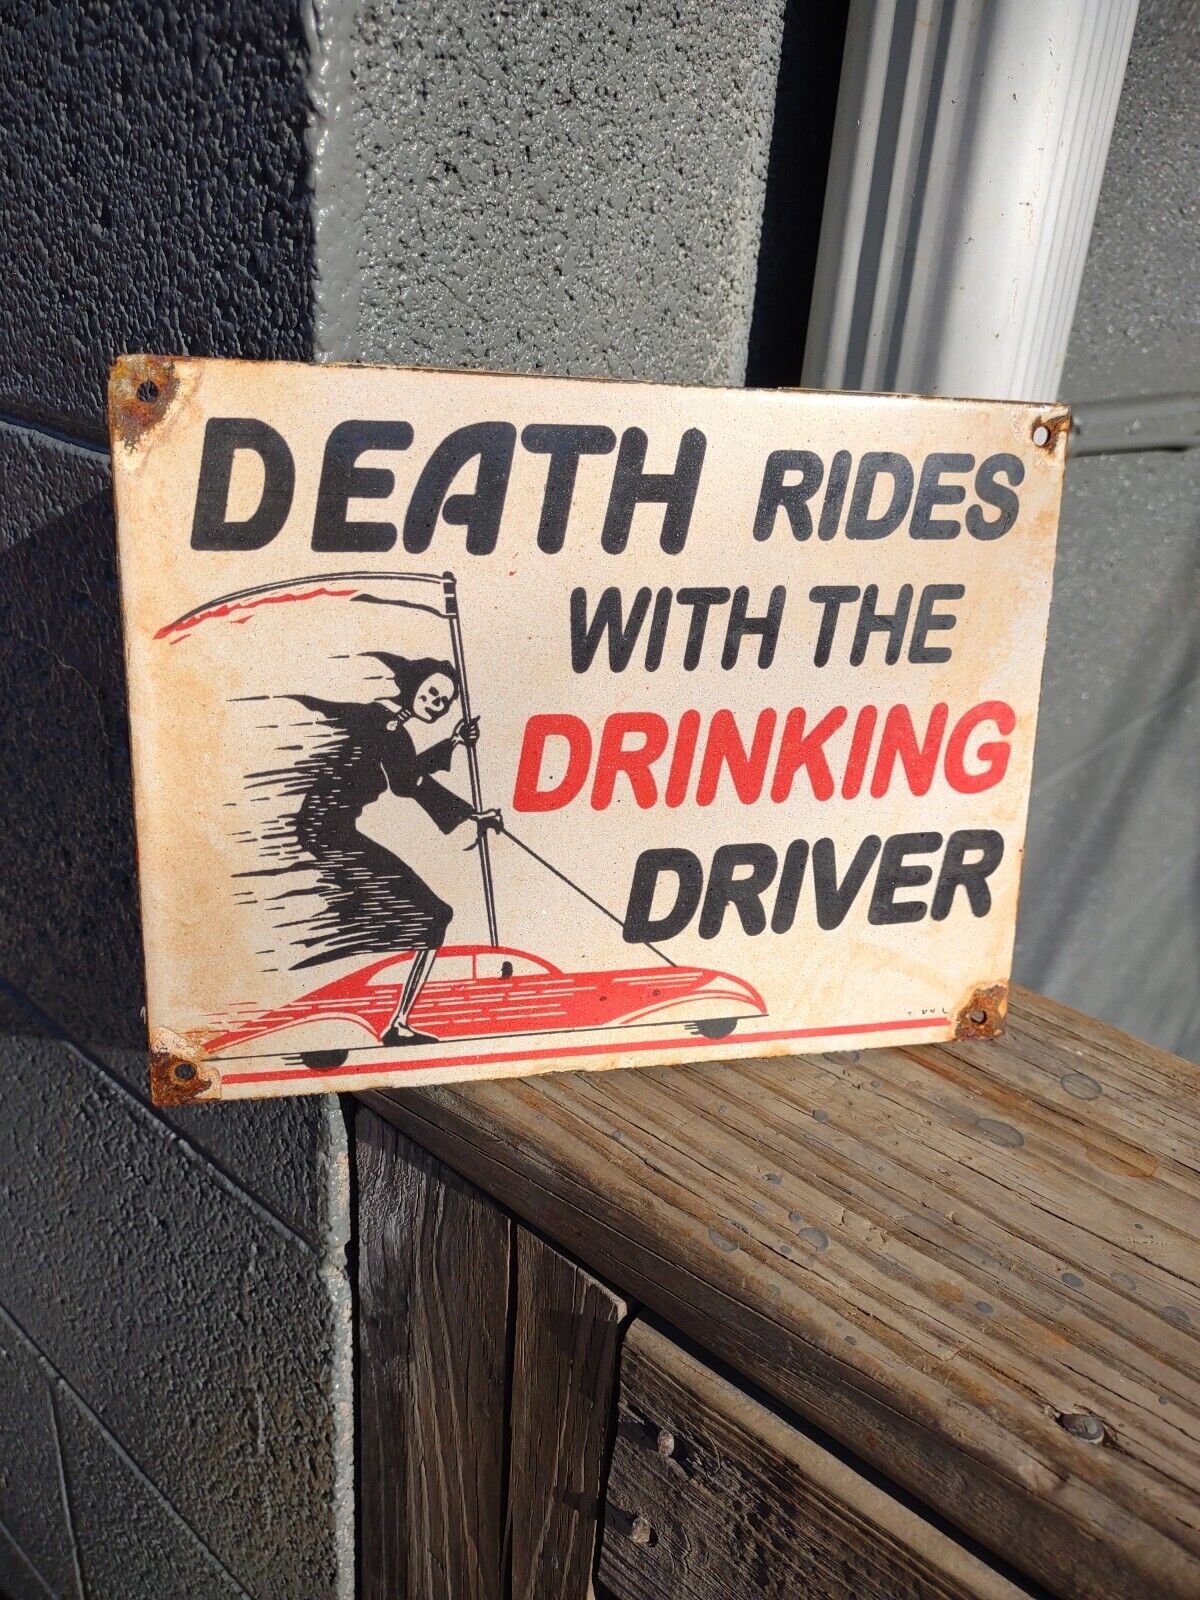 WALL OF DEATH RIDES DRINKING MOTORCYCLE PORCELAIN SIGN CIRCUS INDIAN SKULL BIKE